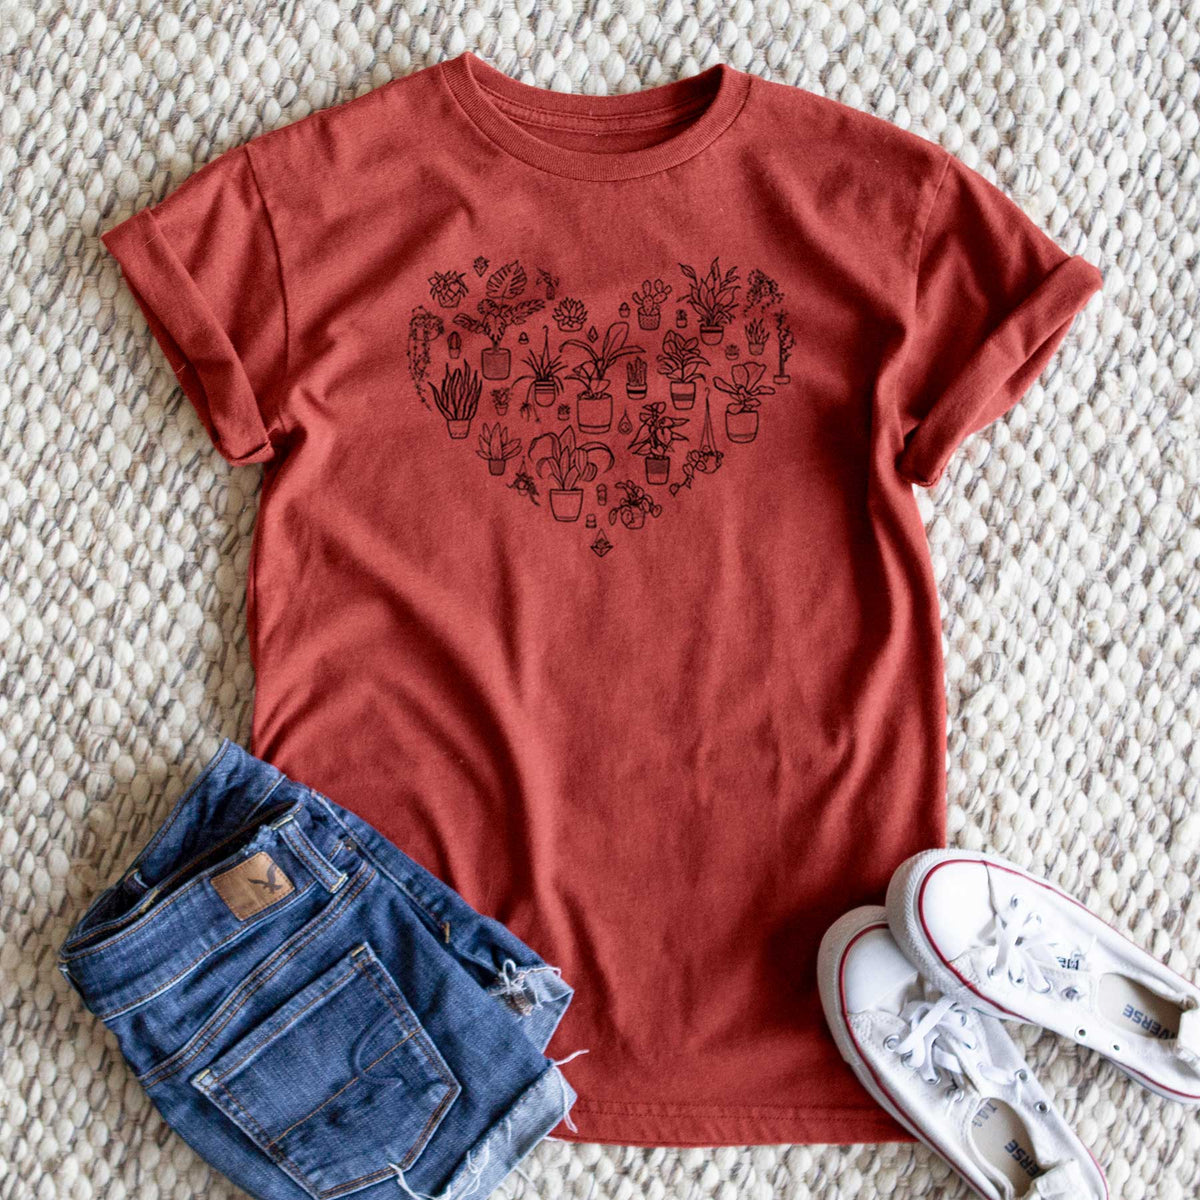 Heart Full of House Plants - Unisex Recycled Eco Tee  - CLOSEOUT - FINAL SALE